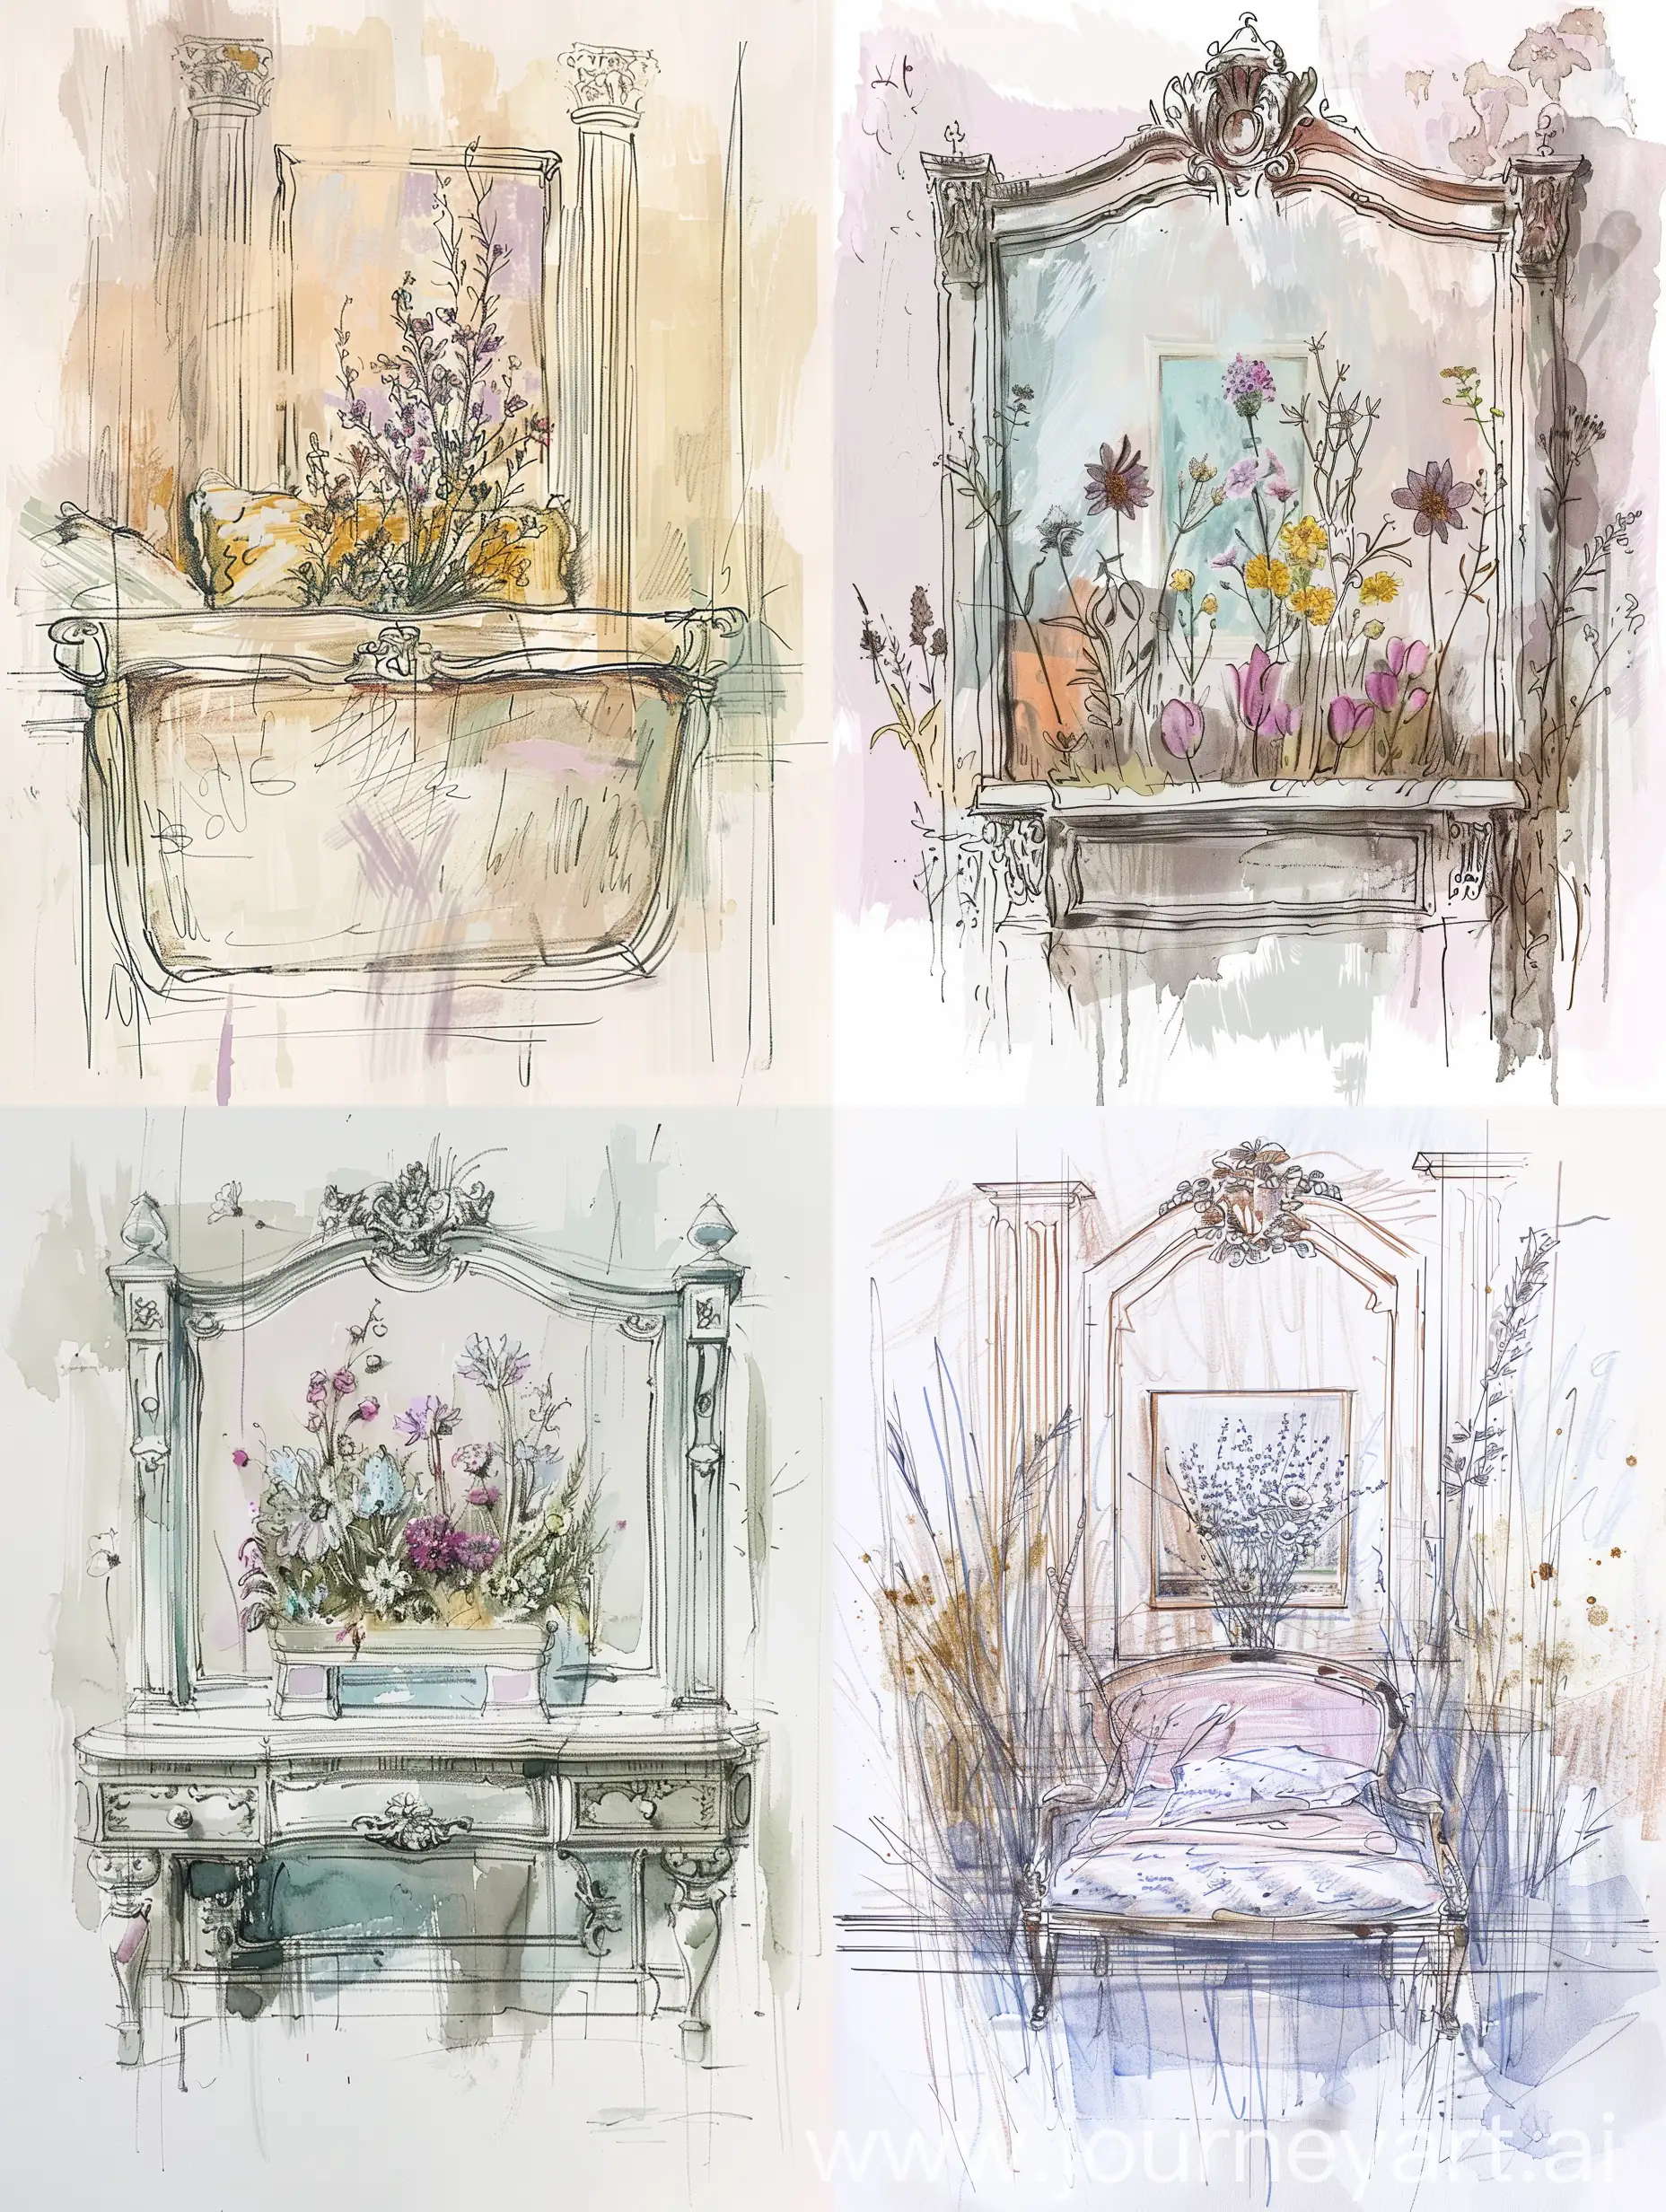 Antique-Shabby-Chic-Bed-with-Wildflower-Painting-HandDrawn-Sketch-in-Pastel-Shades